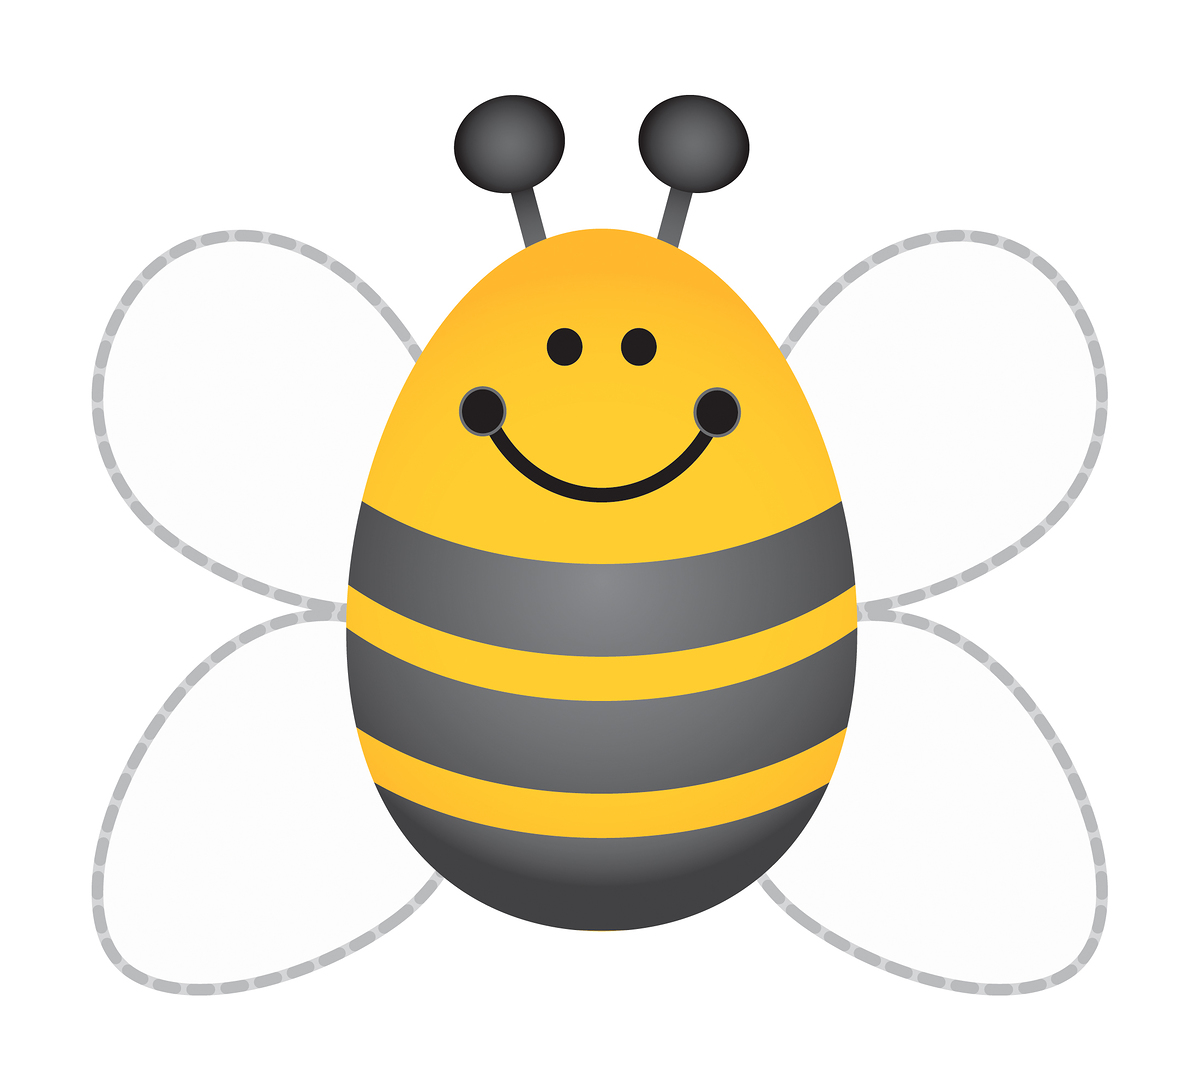 Bumble Bee Template | Free Download Clip Art | Free Clip Art | on ...